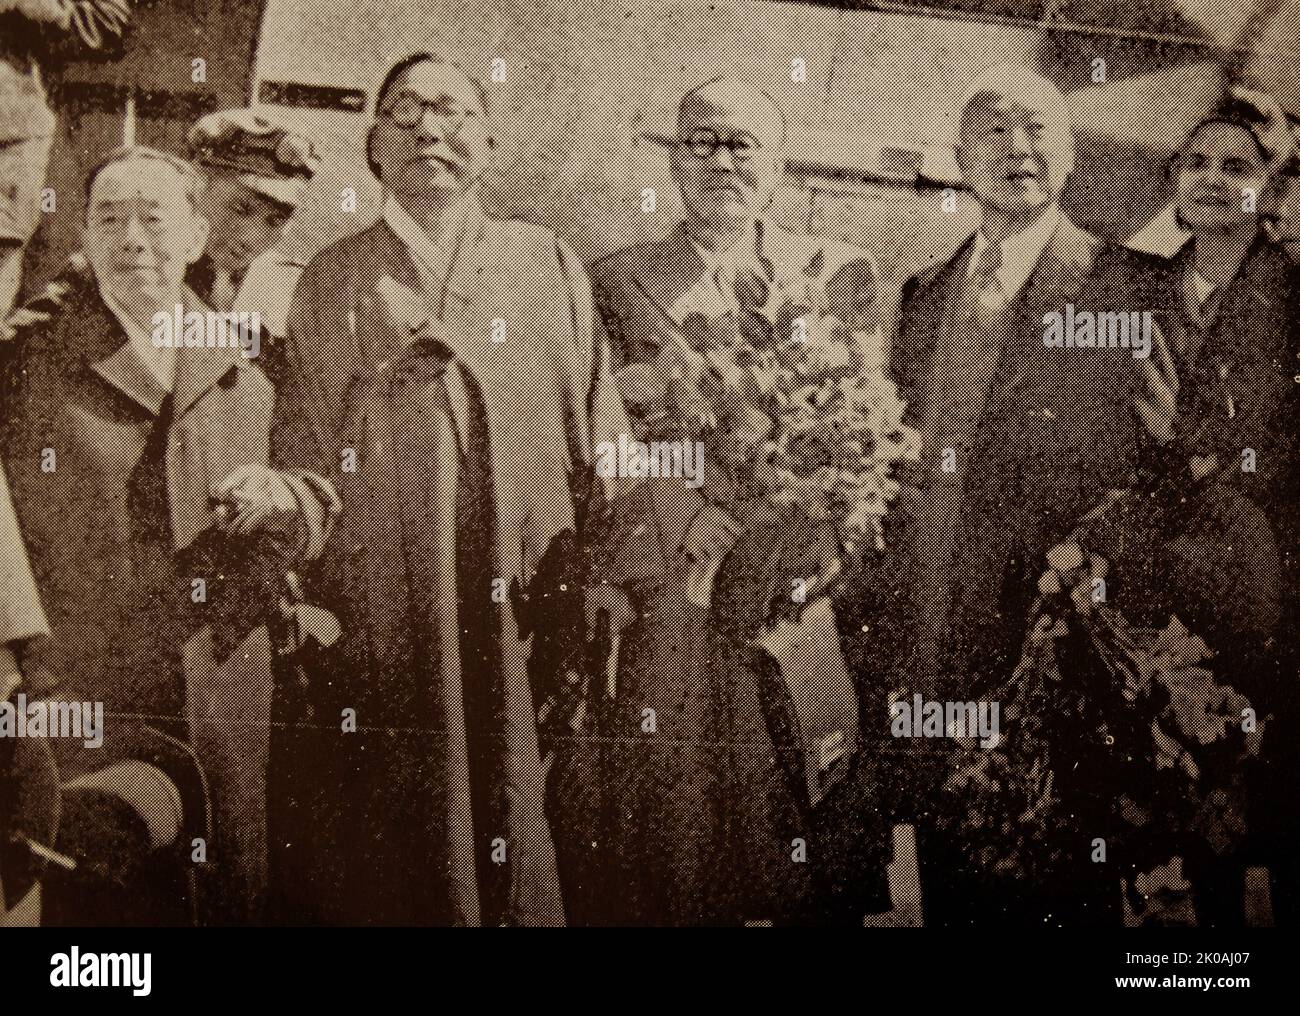 Homecoming of the Prominent Figures in Republic of Korea Provisional Government (right to left): Franziska Donner, spouse of Syngman Rhee, General Lee Cheong-Cheon holding a bouquet of flowers (middle); Kim-Gu Stock Photo